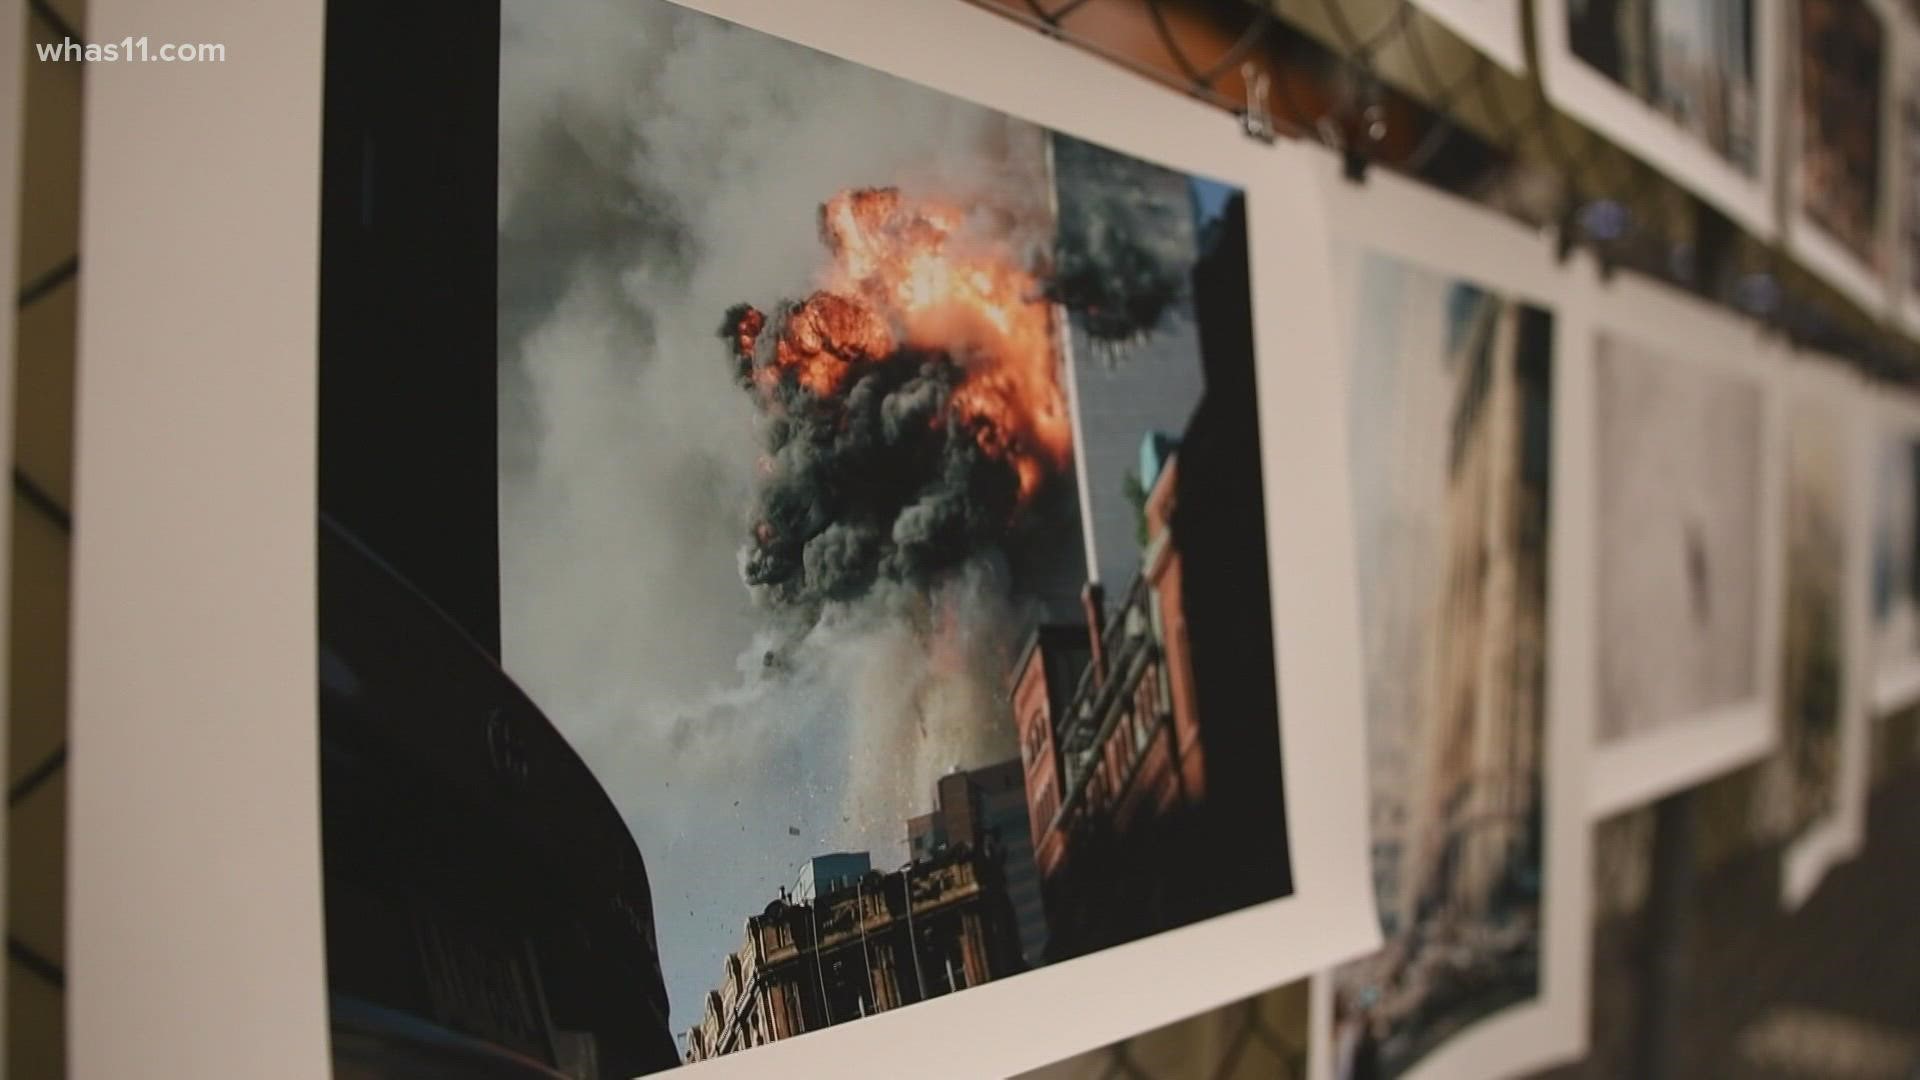 In Louisville, a special exhibit at the public library features a collection of photographs taken the day of and in the aftermath of September 11.